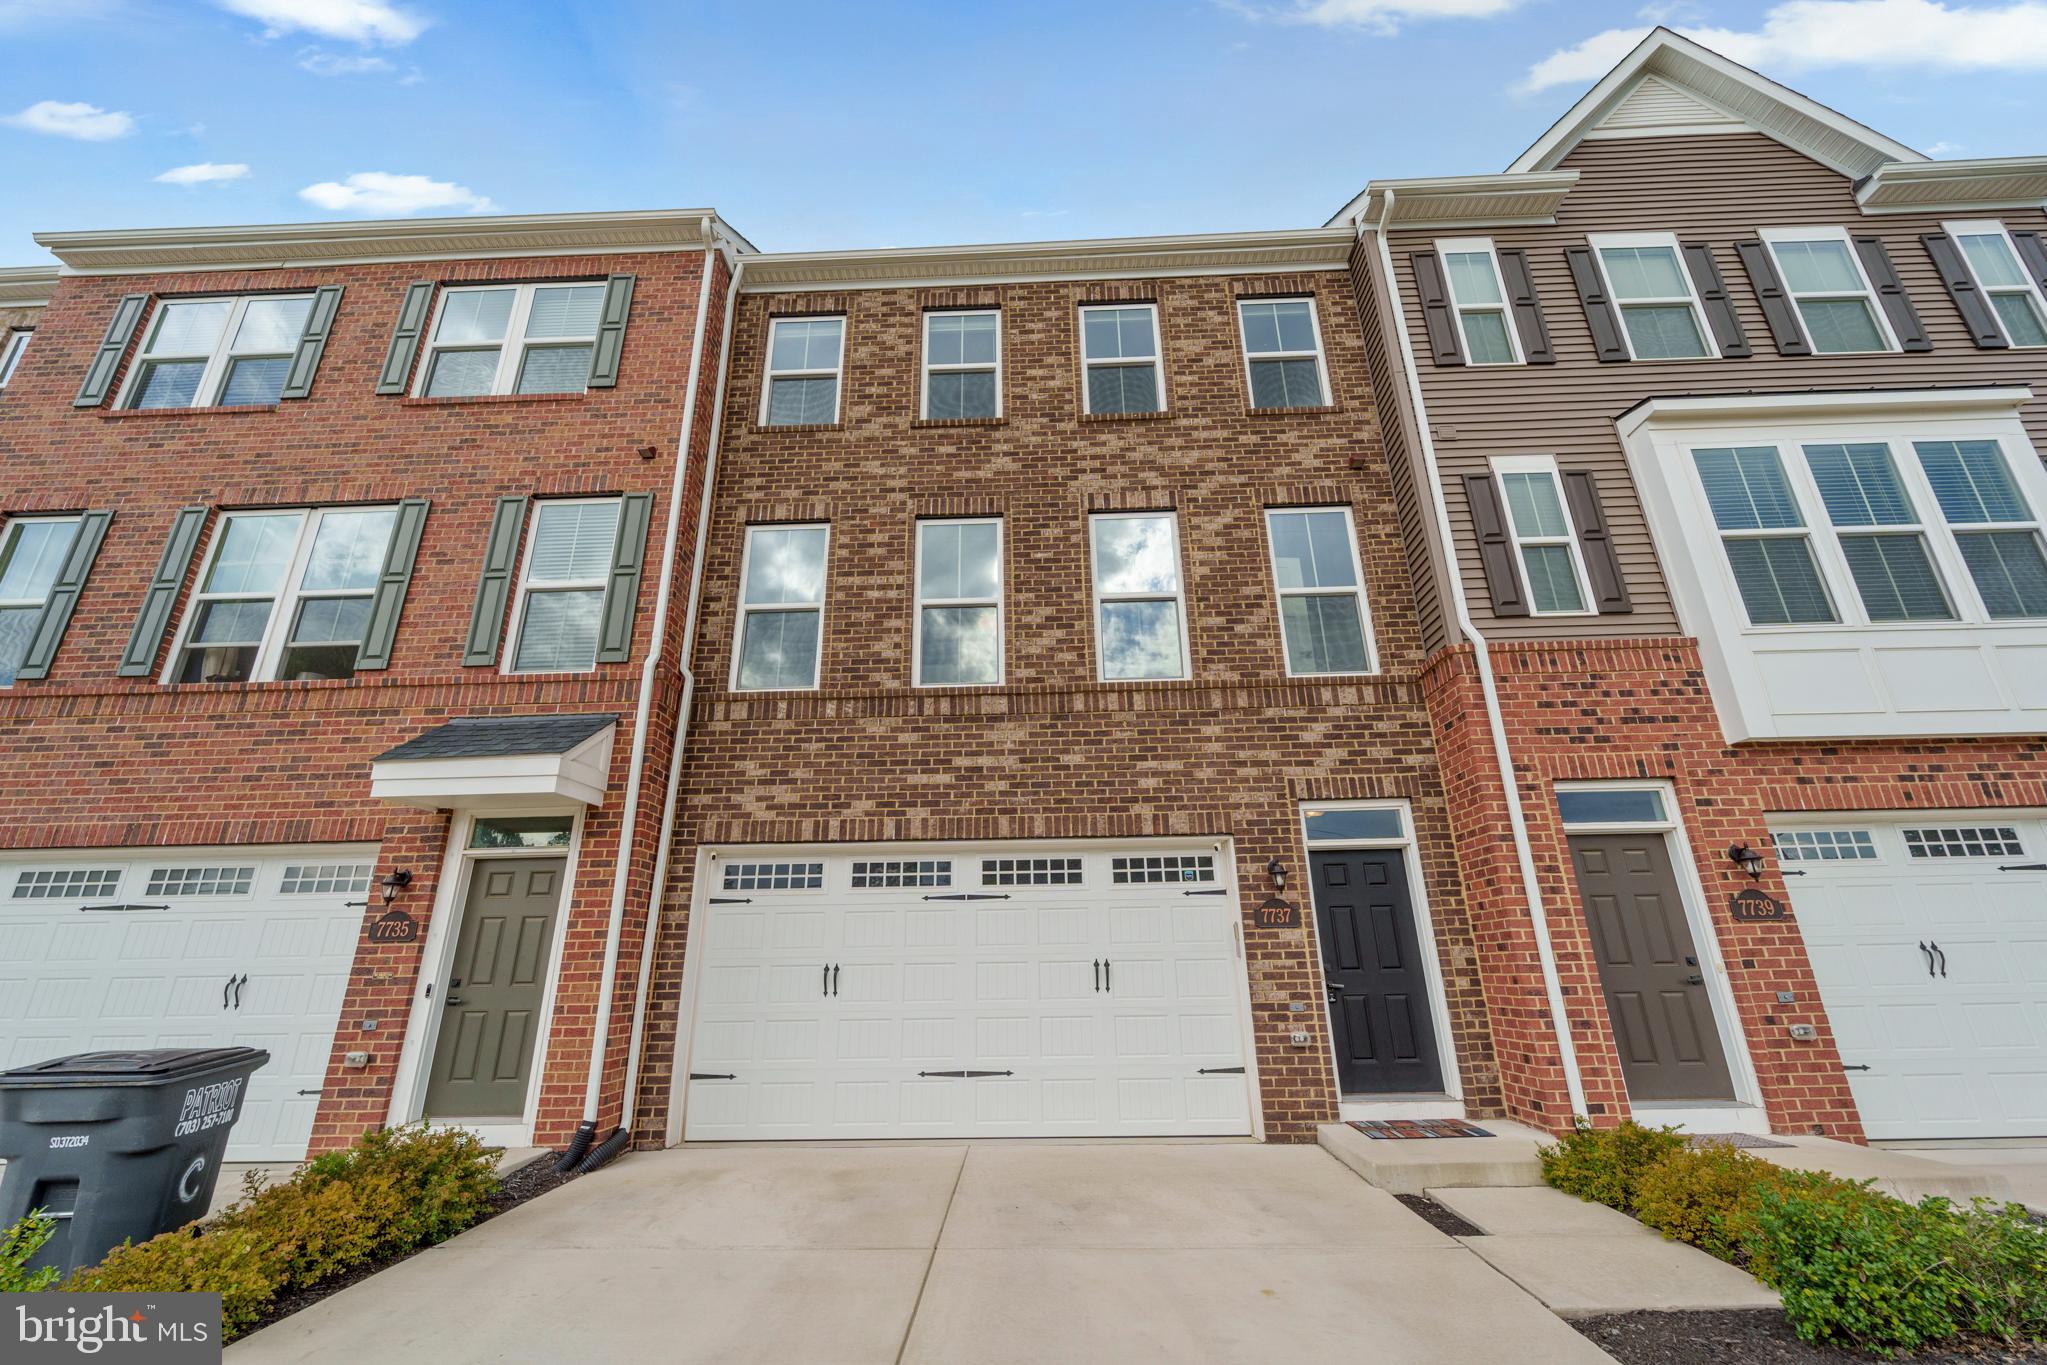 Welcome to 7737 Blackburn Ridge Drive! This 4 bed 3/1 bath 3-story townhome is huge! With over 3,000